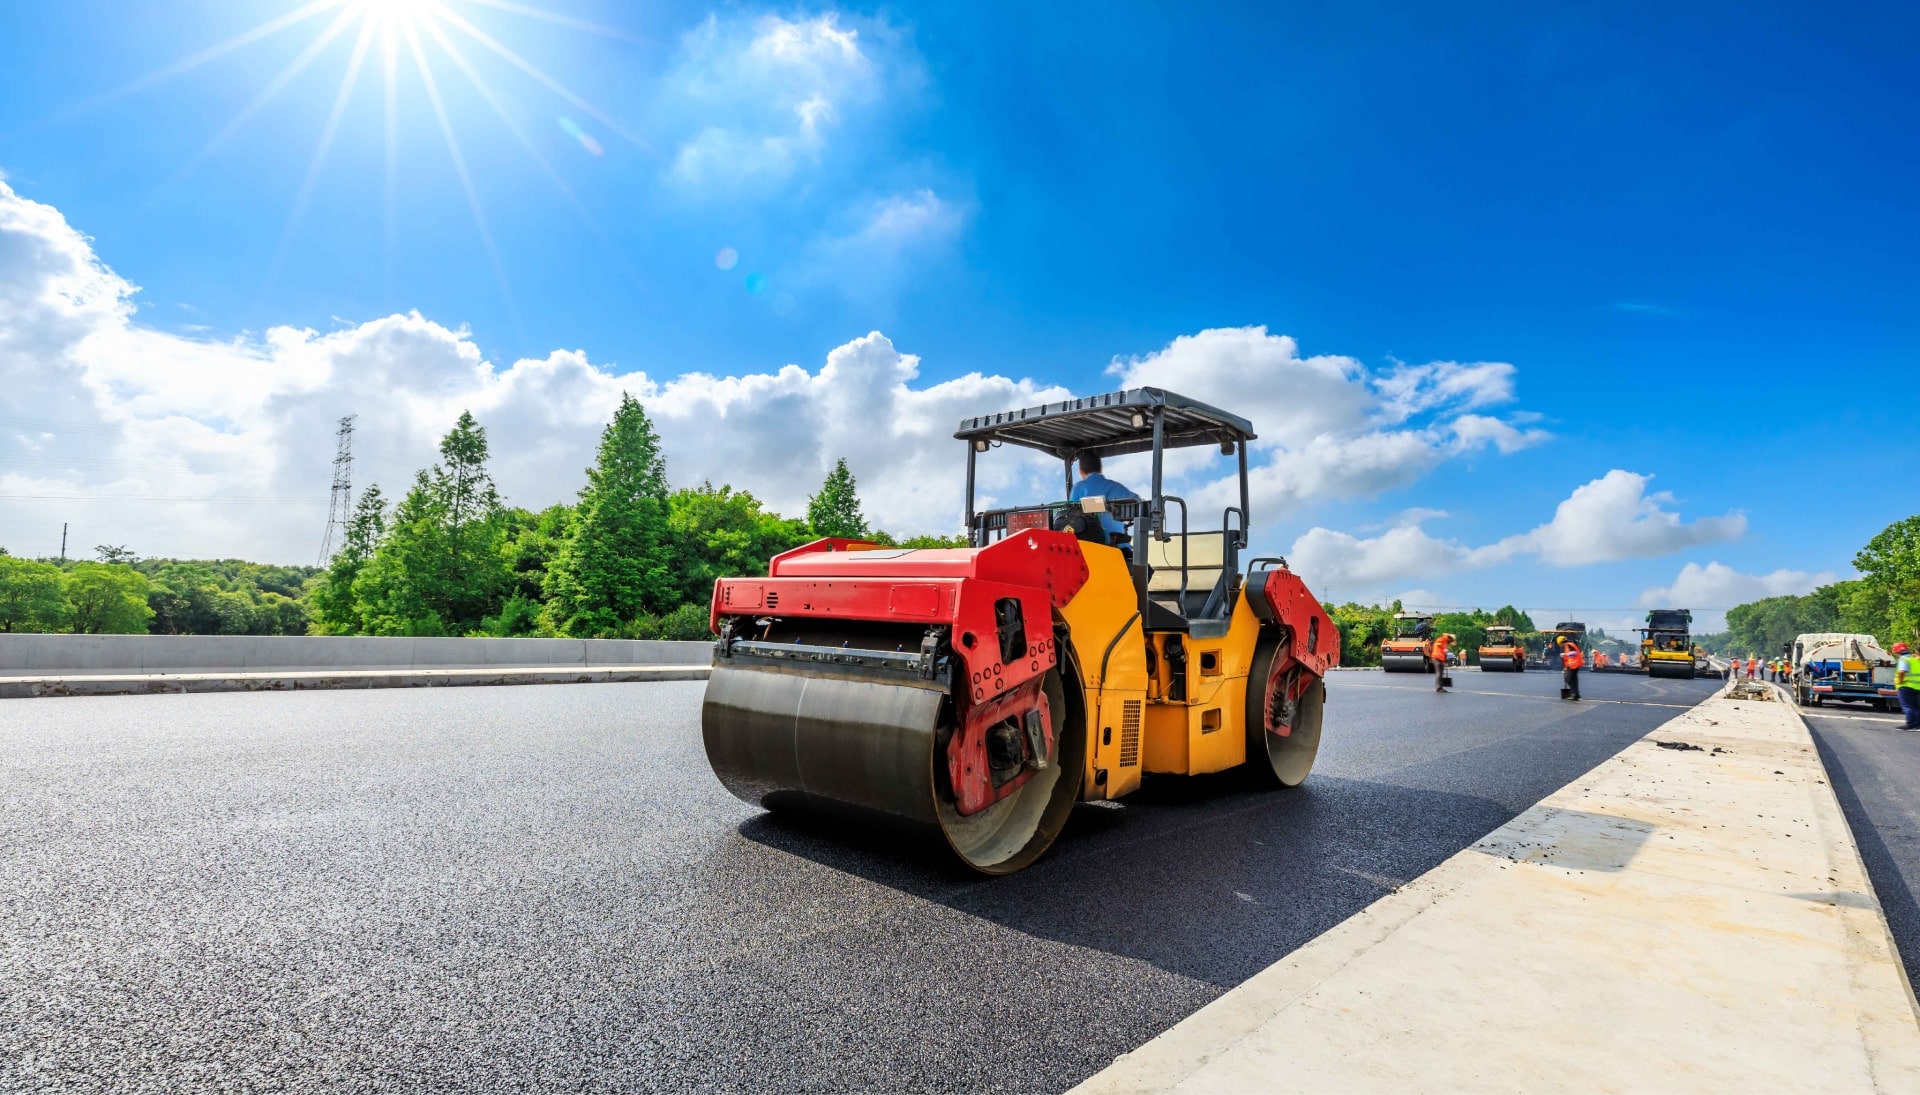 A team of construction workers operating heavy machinery, meticulously laying down fresh, smooth asphalt on a newly constructed road in Orlando, with steam rising from the hot surface.